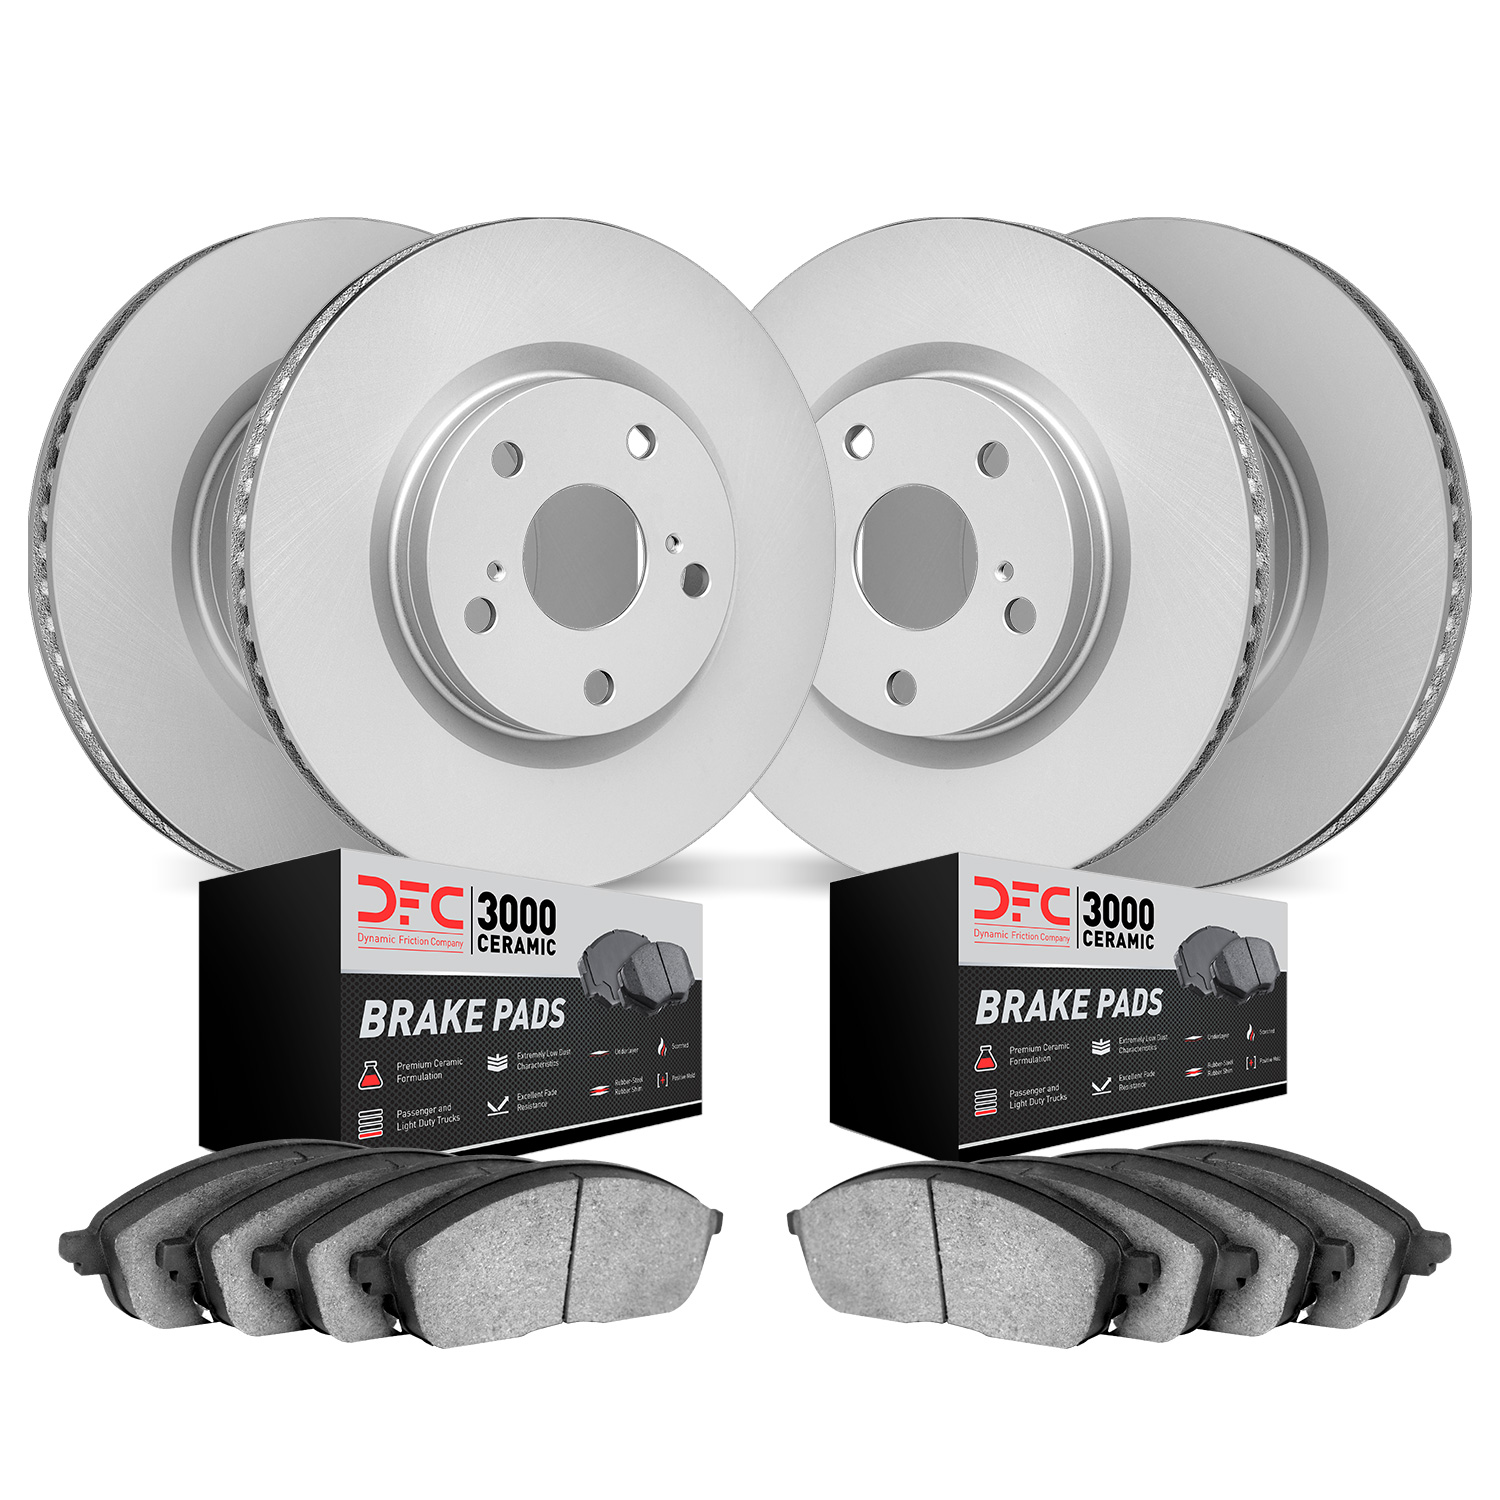 4304-74017 Geospec Brake Rotors with 3000-Series Ceramic Brake Pads Kit, 2006-2011 Audi/Volkswagen, Position: Front and Rear